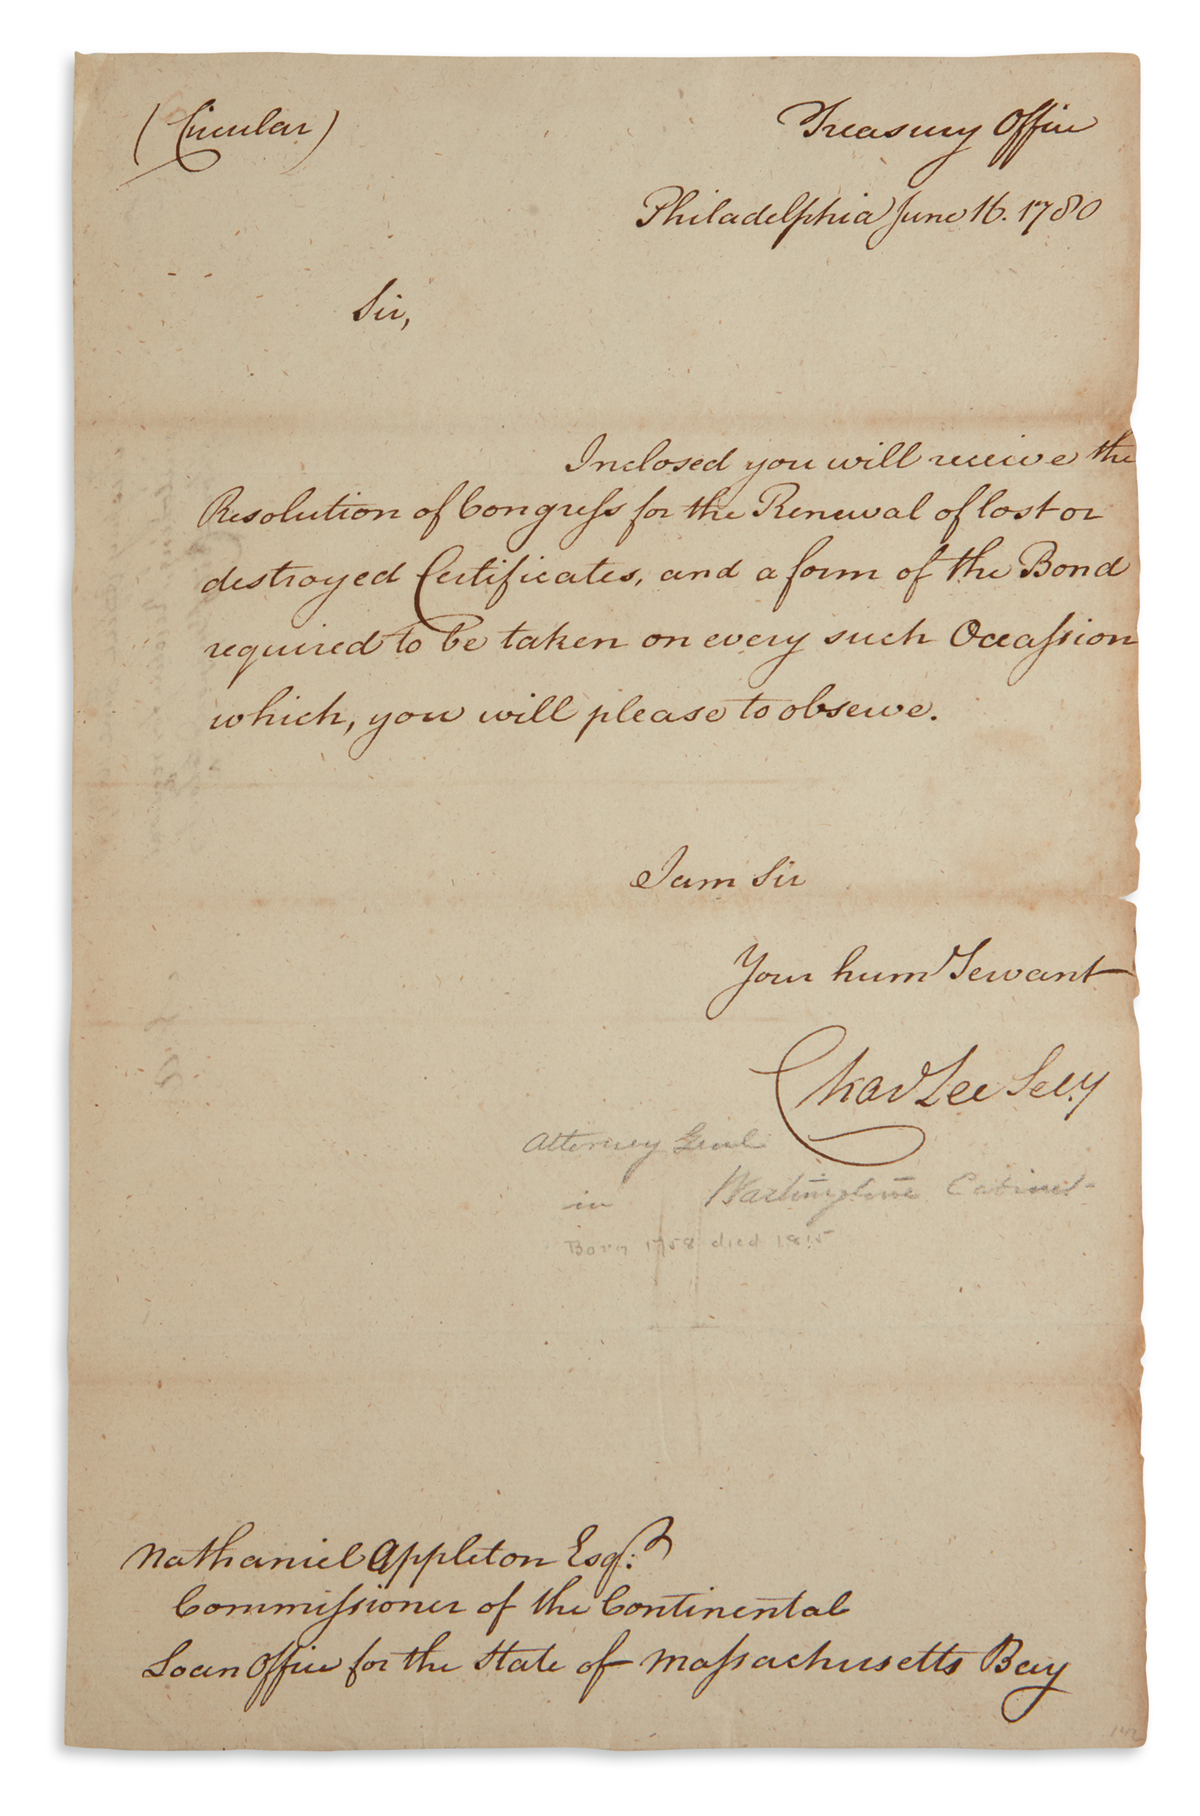 (AMERICAN REVOLUTION.) CHARLES LEE. Brief Letter Signed, as Secretary to the Board of Treasury, to Commissioner of the C...